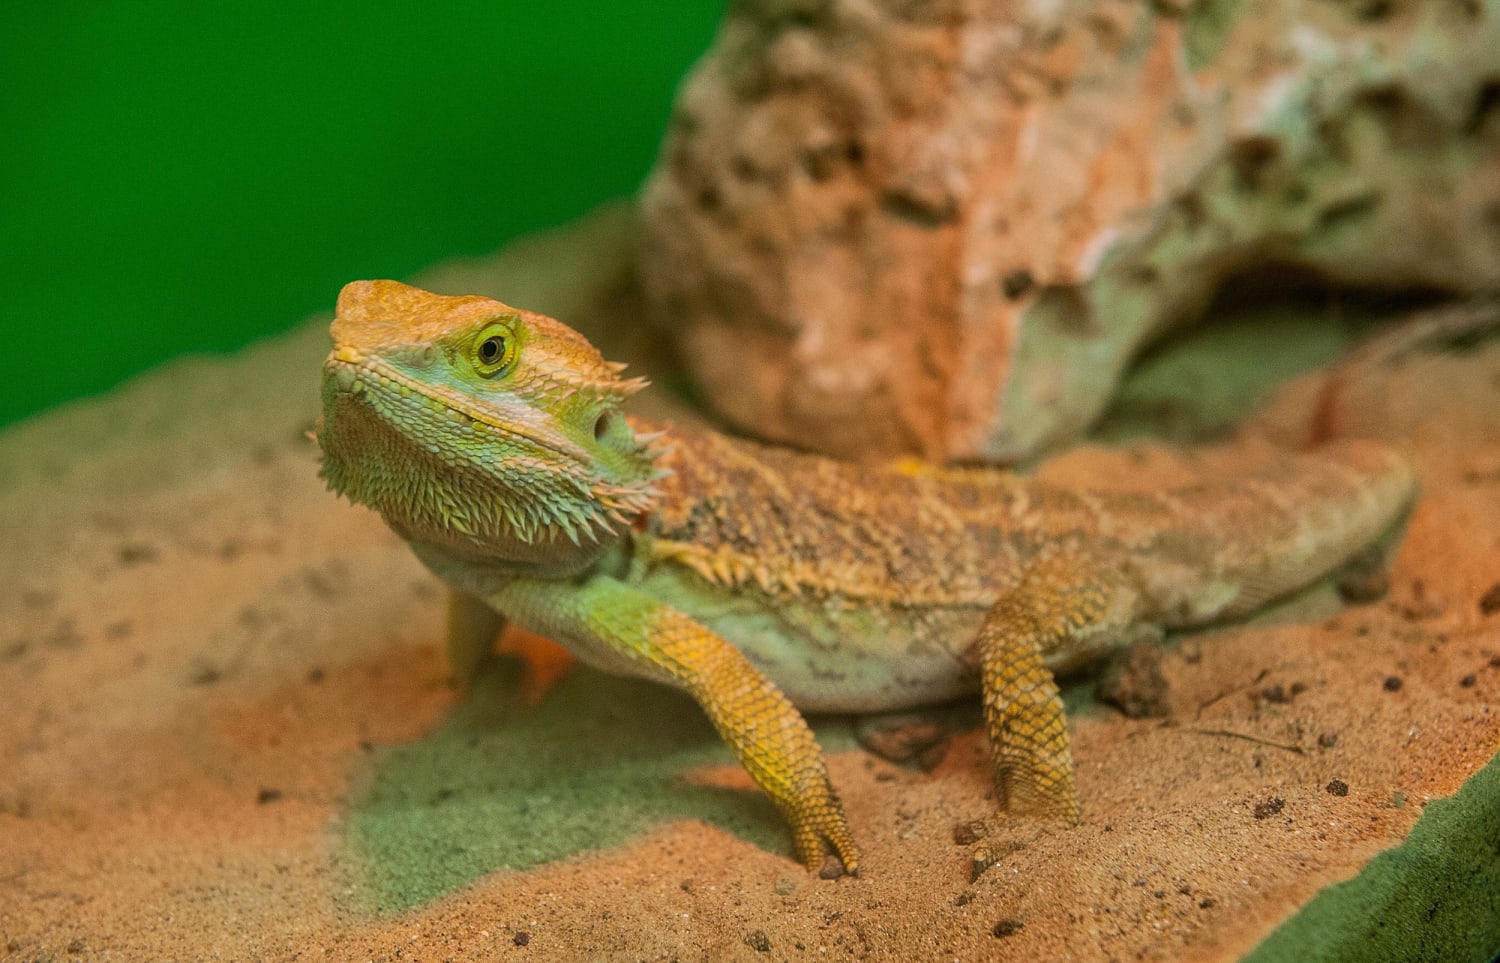 Bearded Dragon Lizards Infect 132 With Salmonella - NBC News